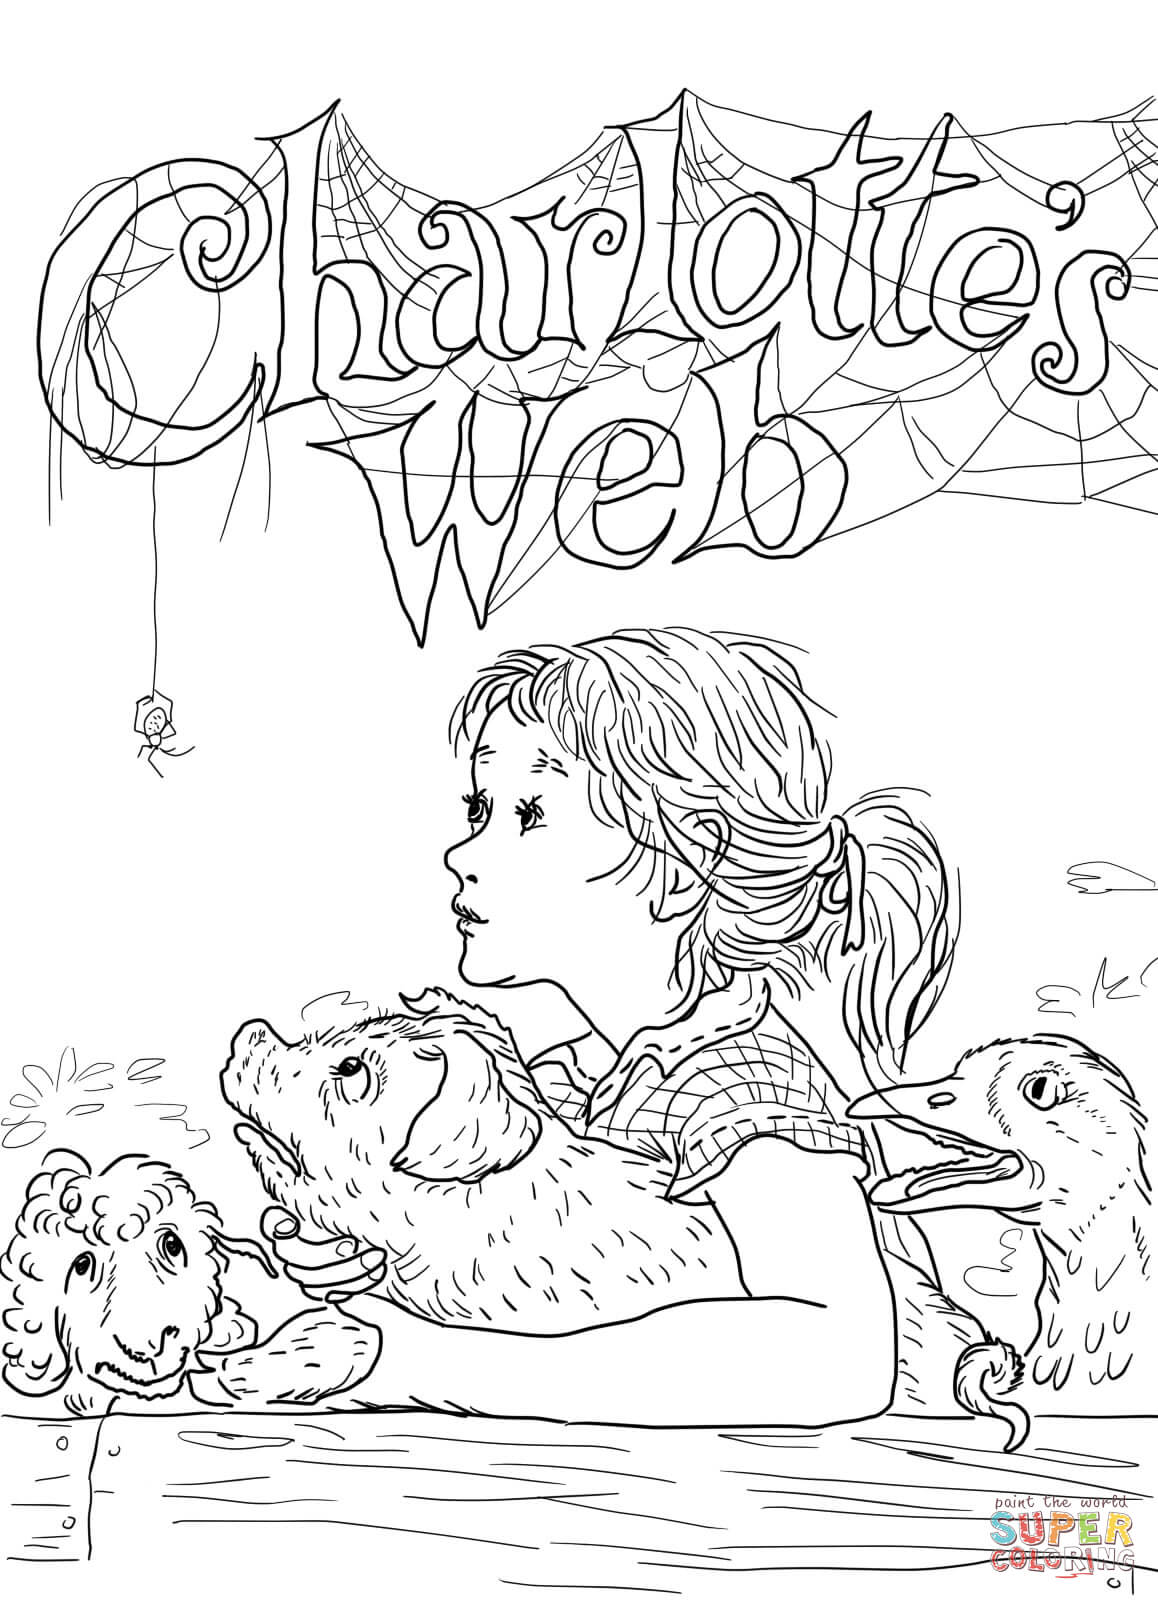 Free Charlottes Web Coloring Pages Download Free Charlottes Web